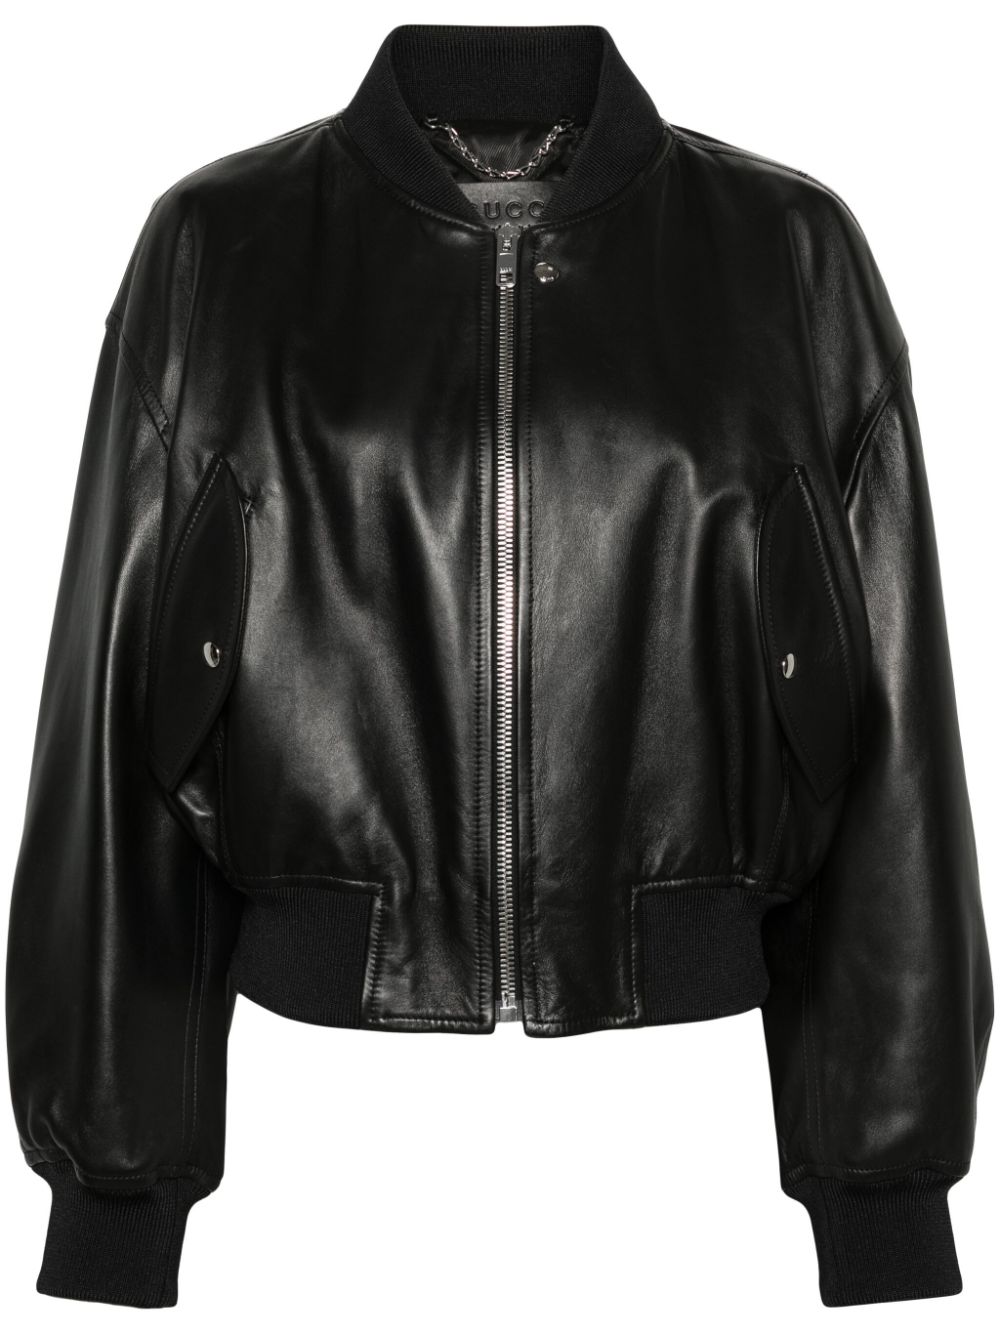 Gucci cropped leather bomber jacket - Black von Gucci